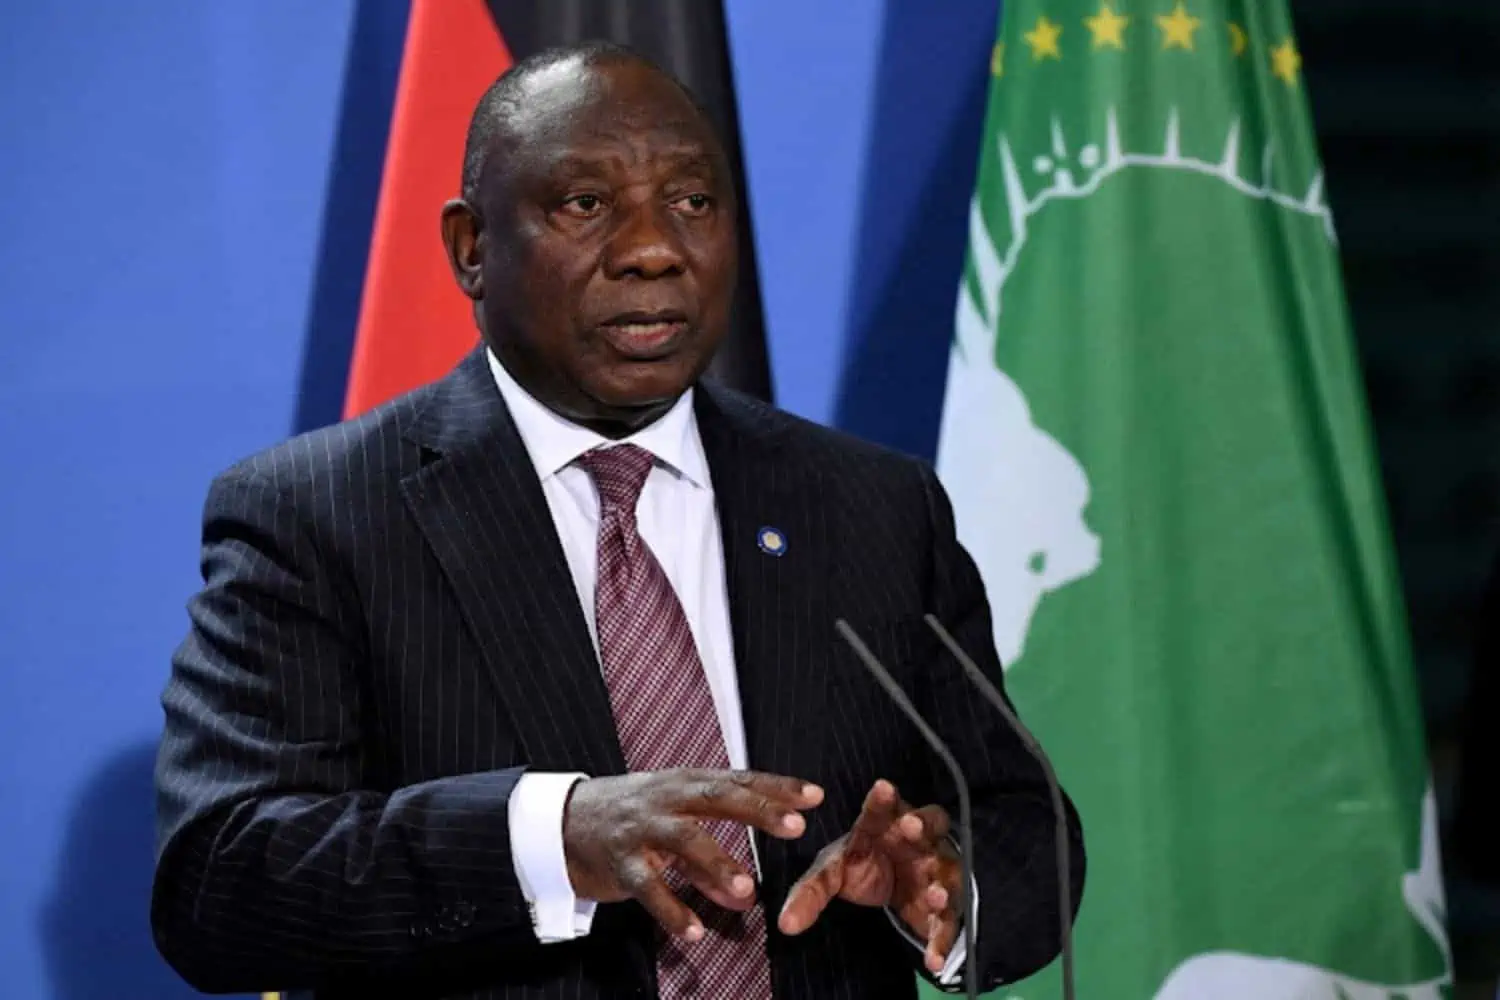 TODAY: South Africa's Top News - Ramaphosa's unfulfilled SONA promises